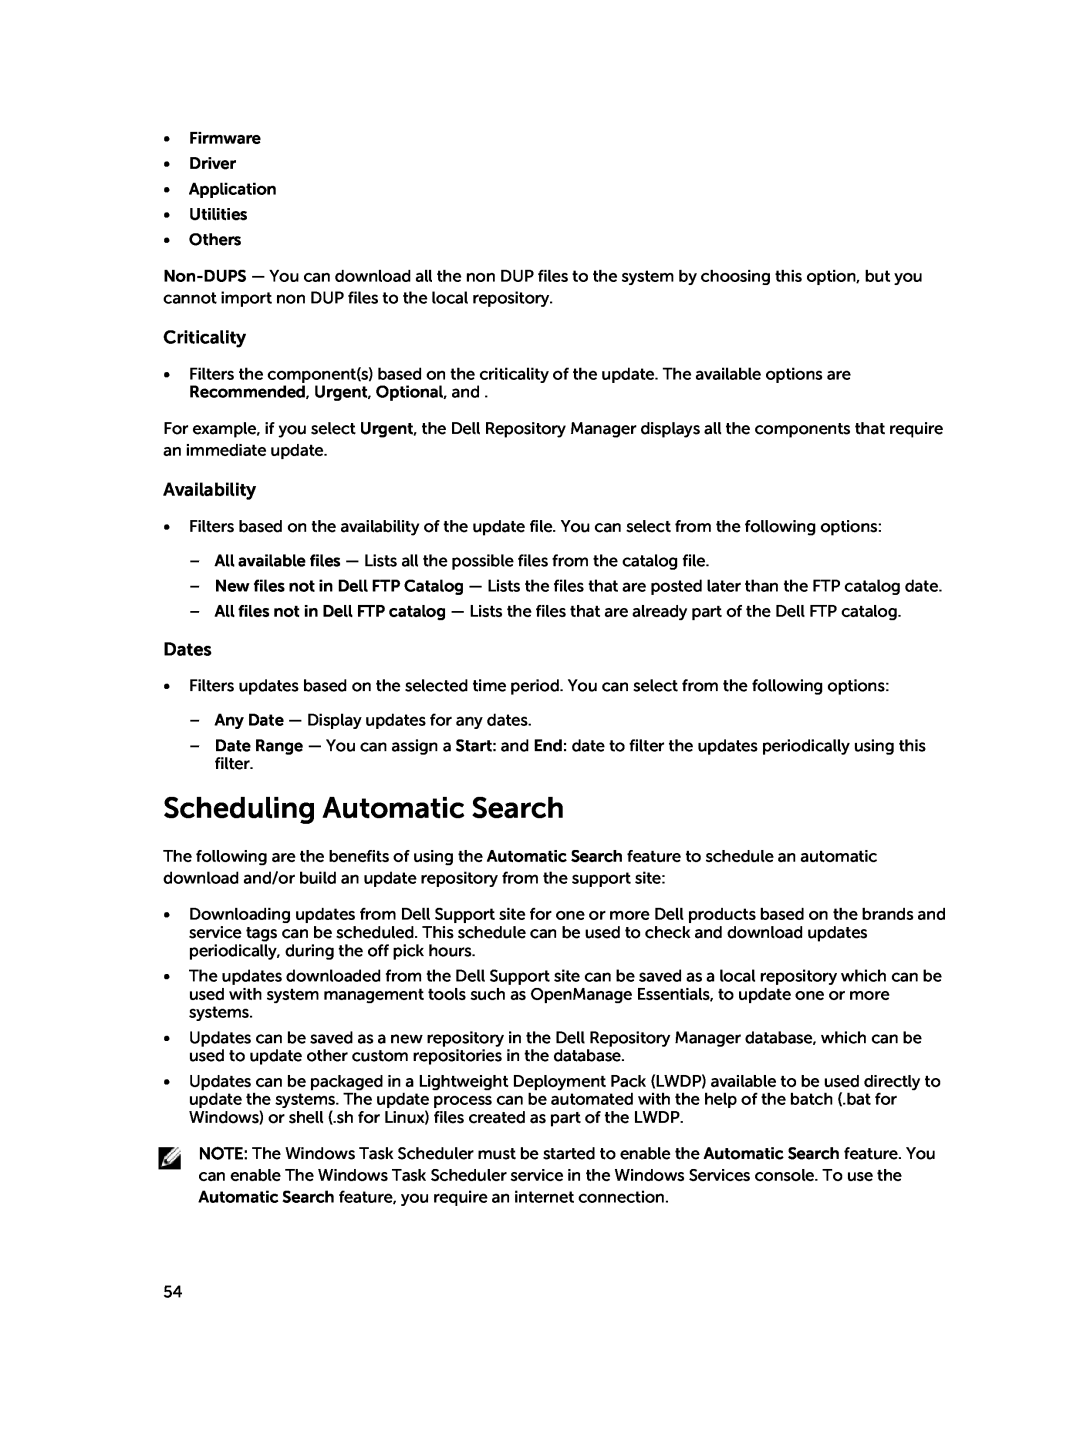 Dell 1.8 manual Scheduling Automatic Search, Criticality, Availability, Dates 